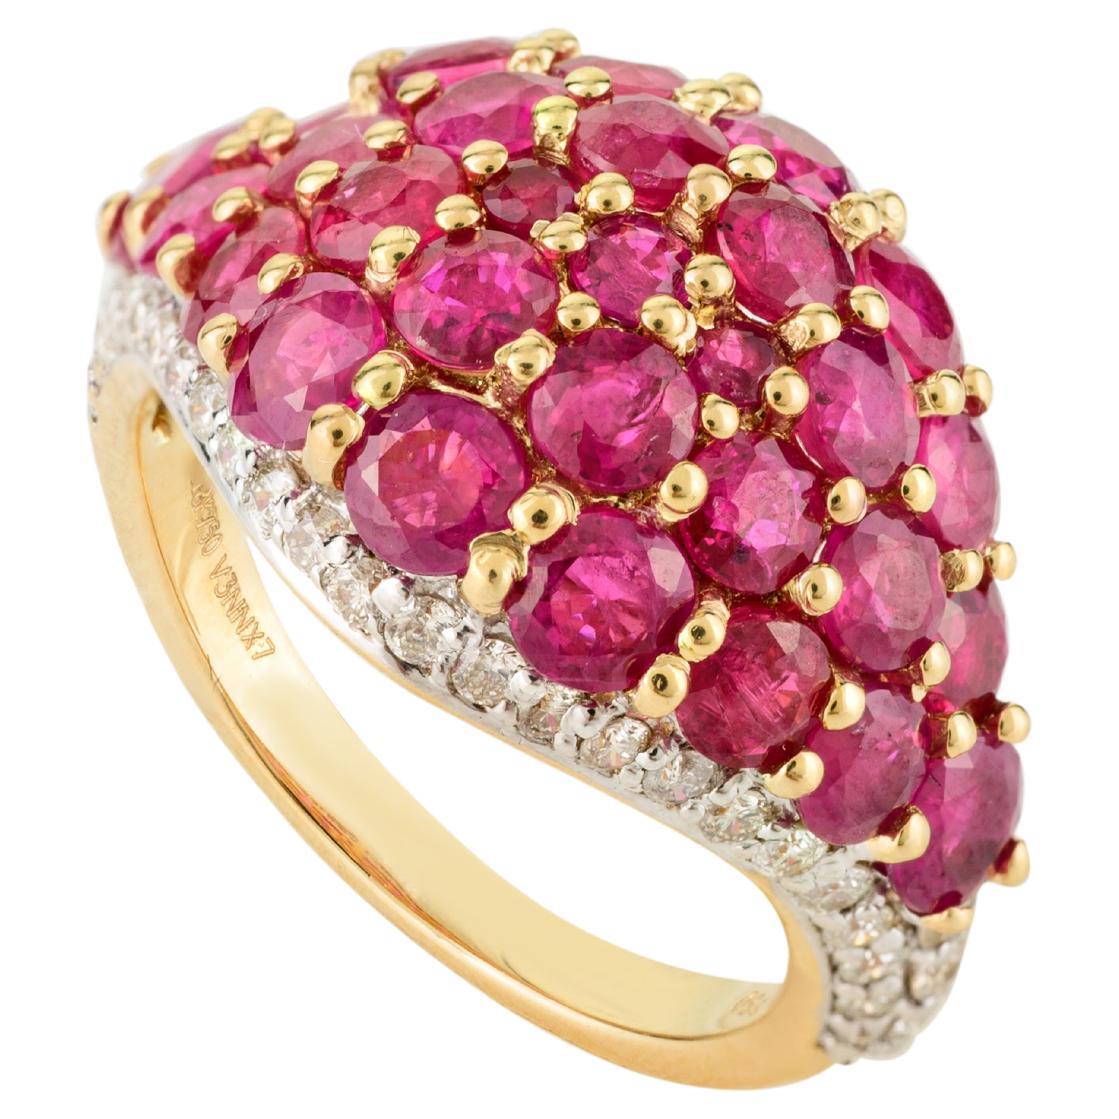 For Sale:  Natural Cluster Ruby and Diamond Wedding Ring in 18k Yellow Gold